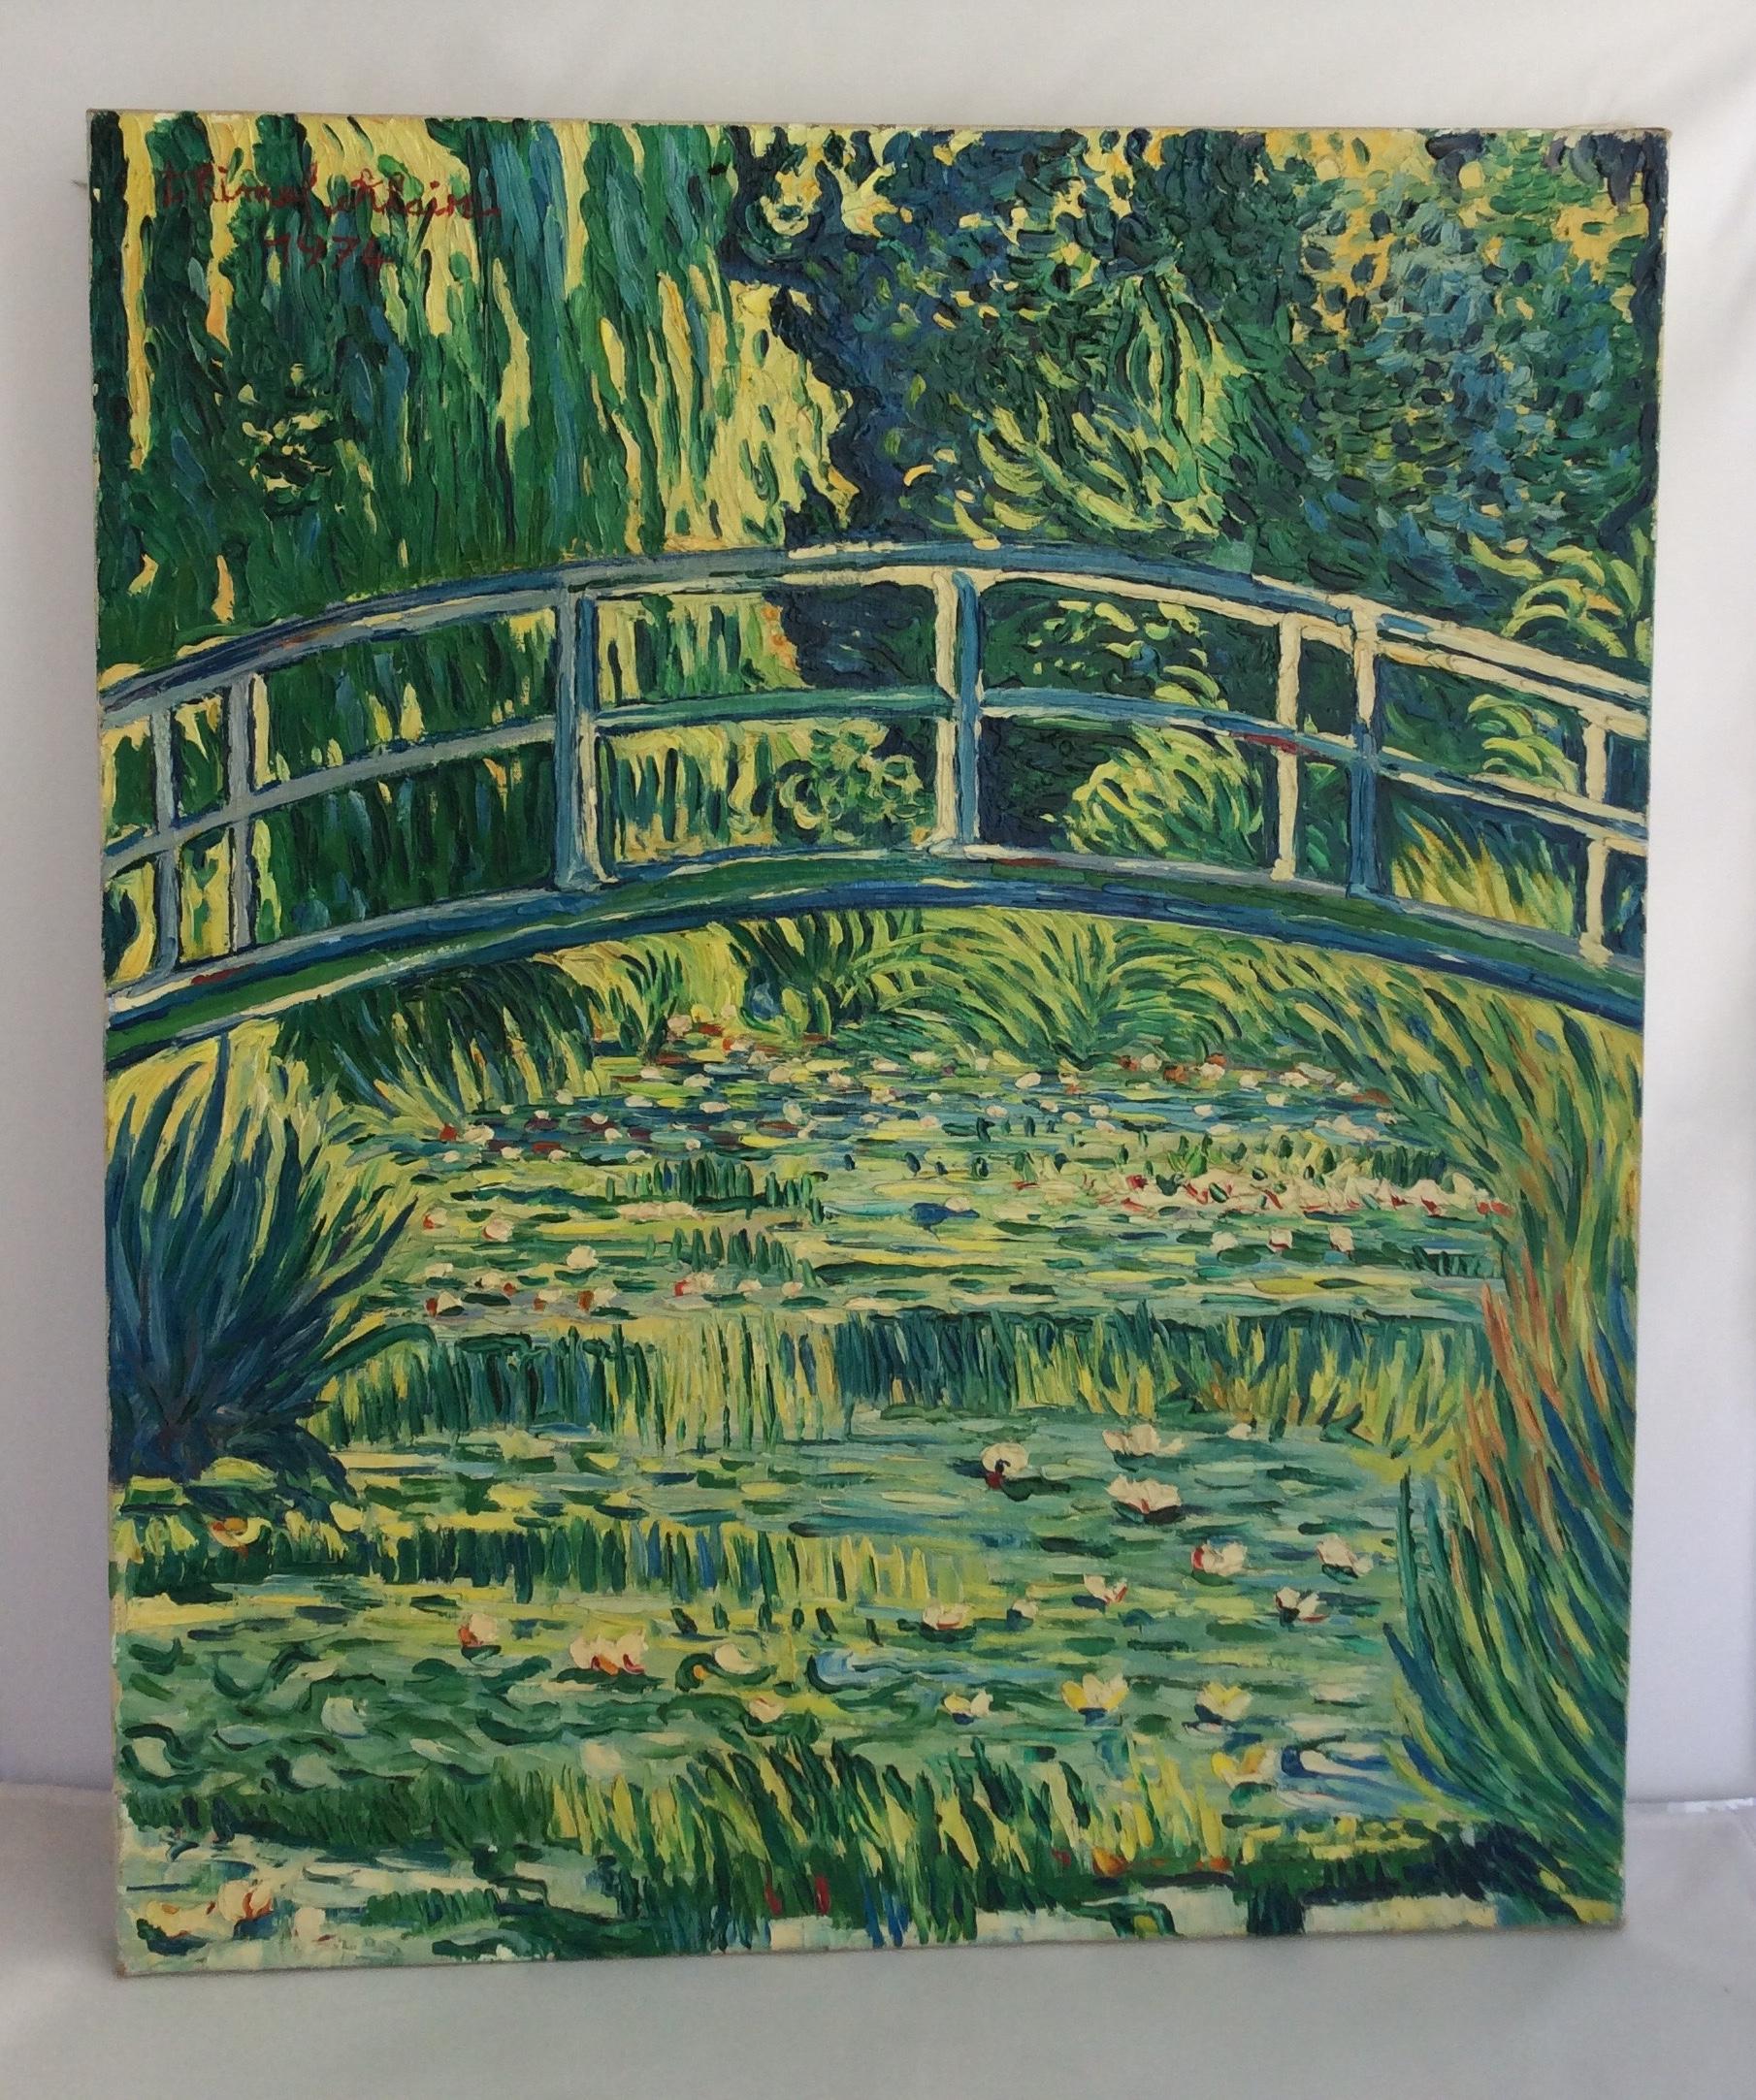 French Post Impressionist Painting After Monet, Signed Alain Thimel 1